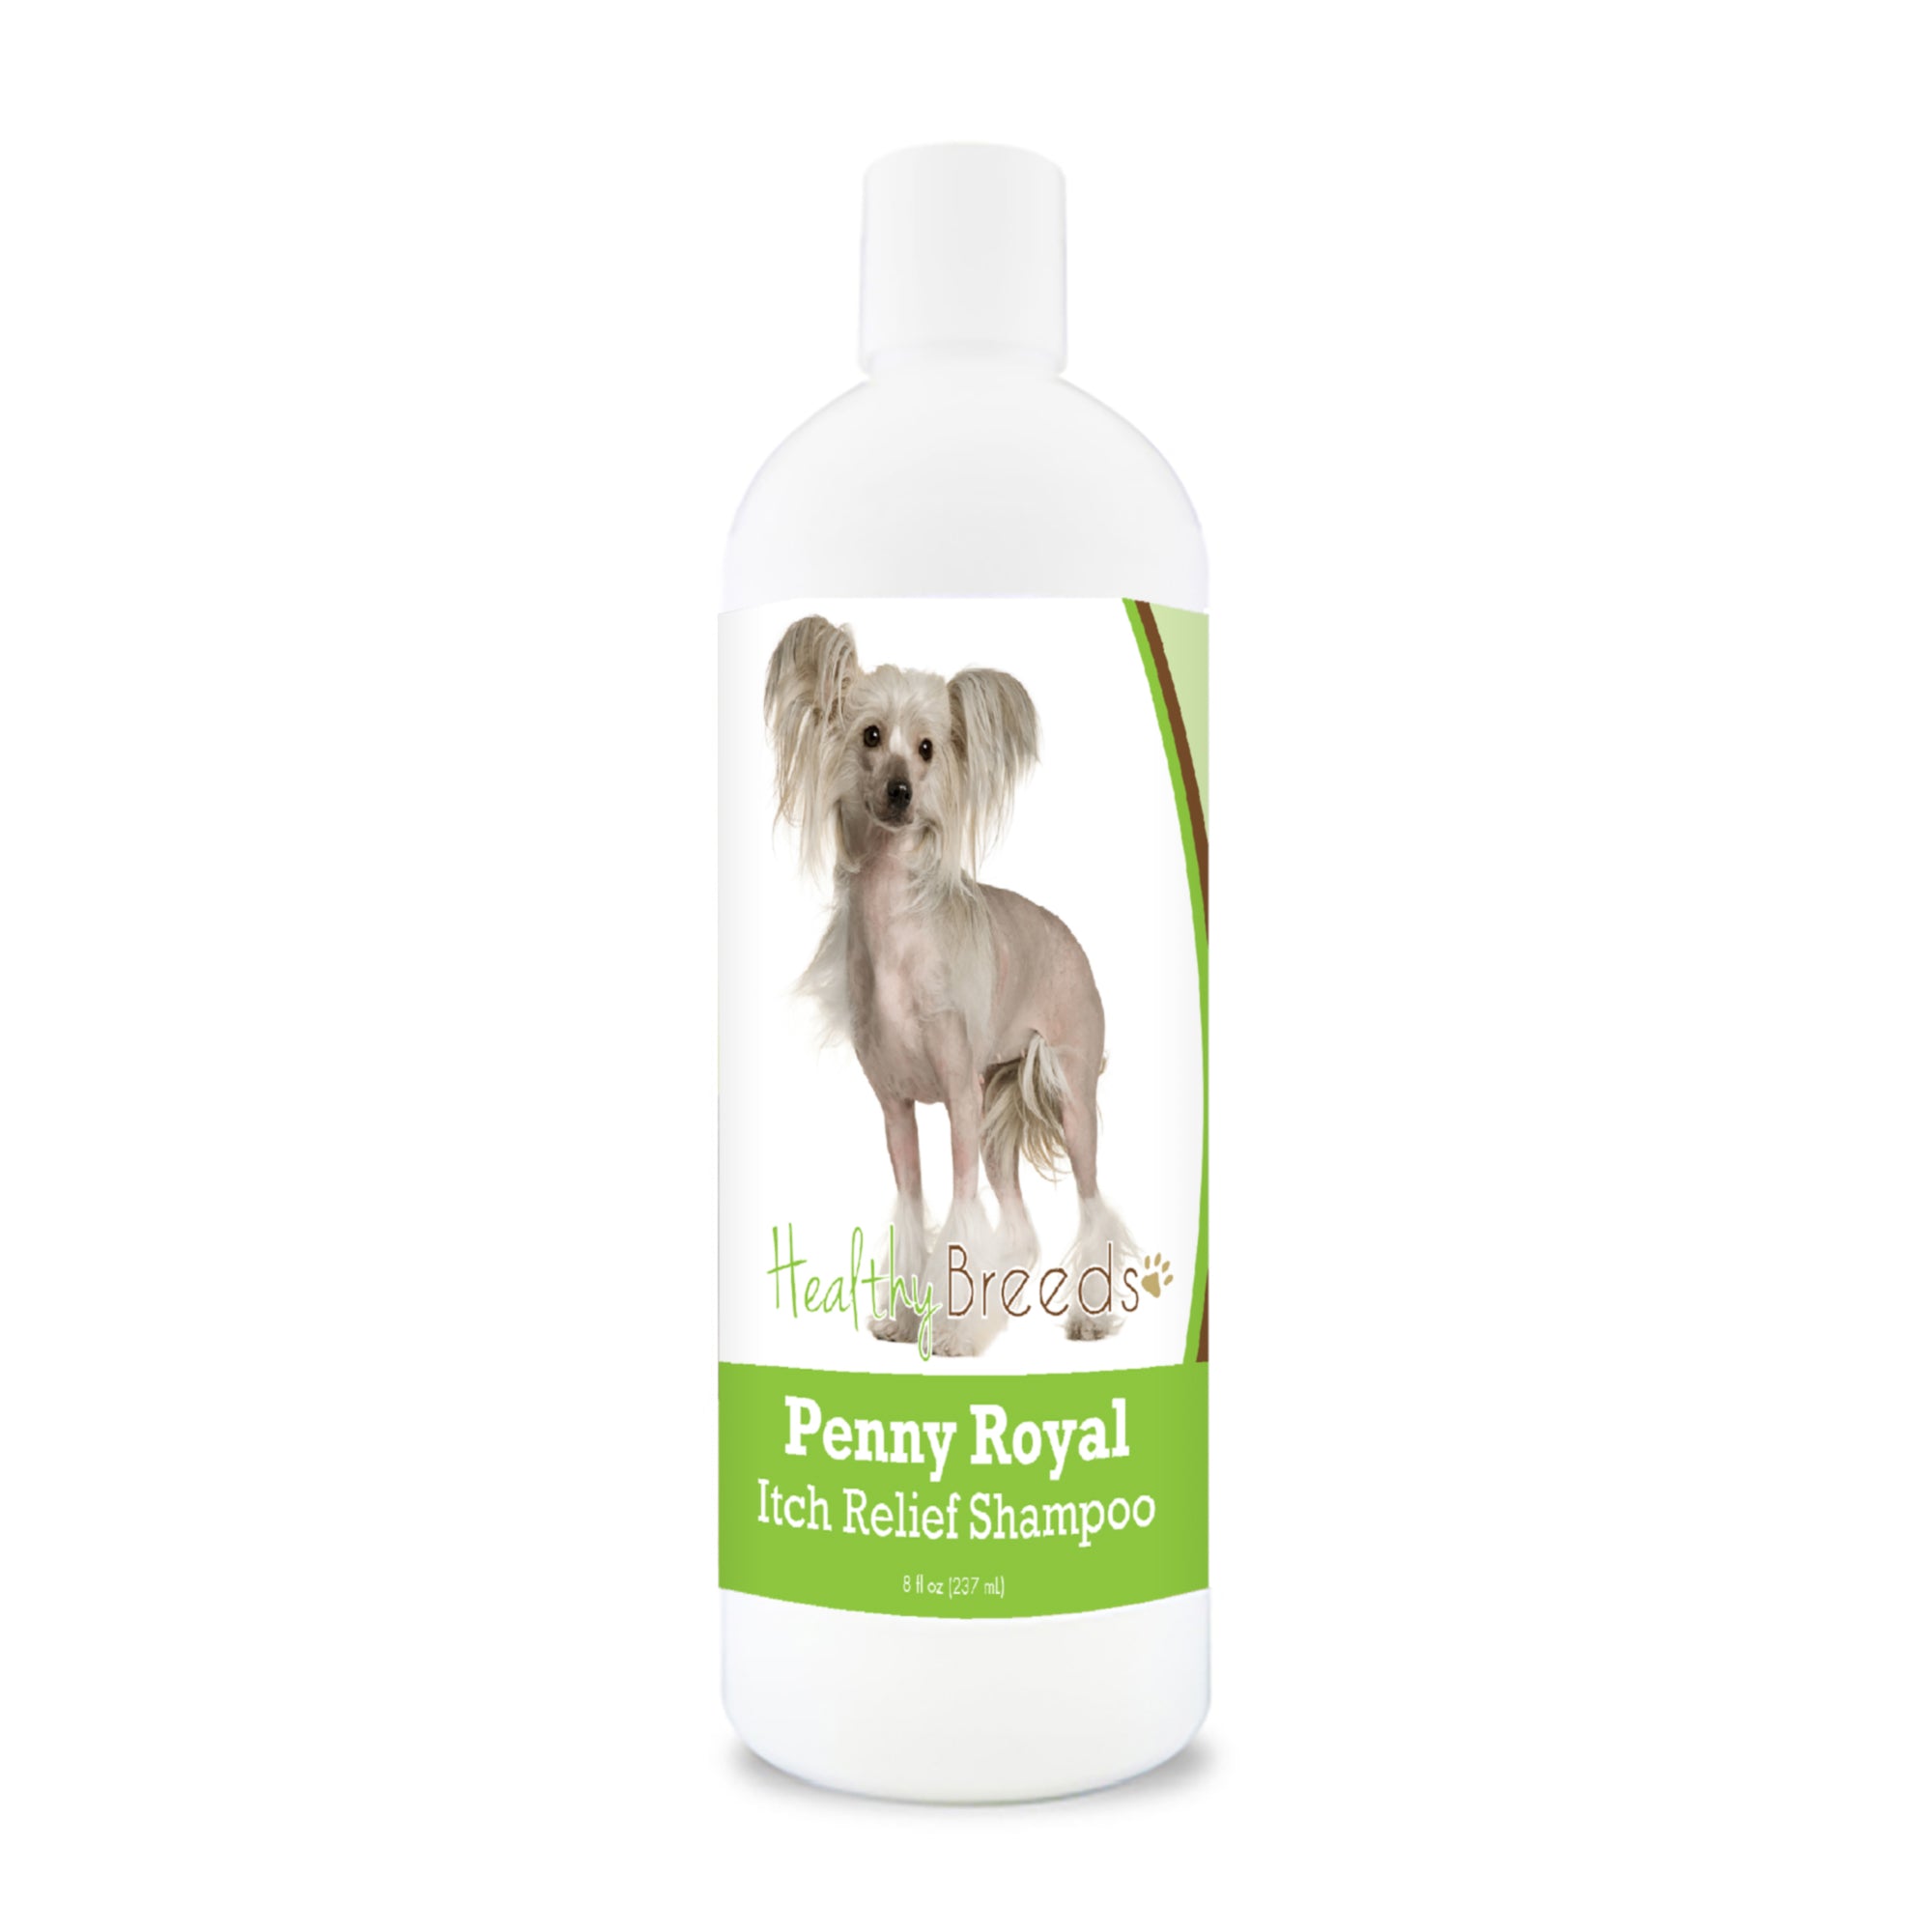 Chinese Crested Penny Royal Itch Relief Shampoo 8 oz